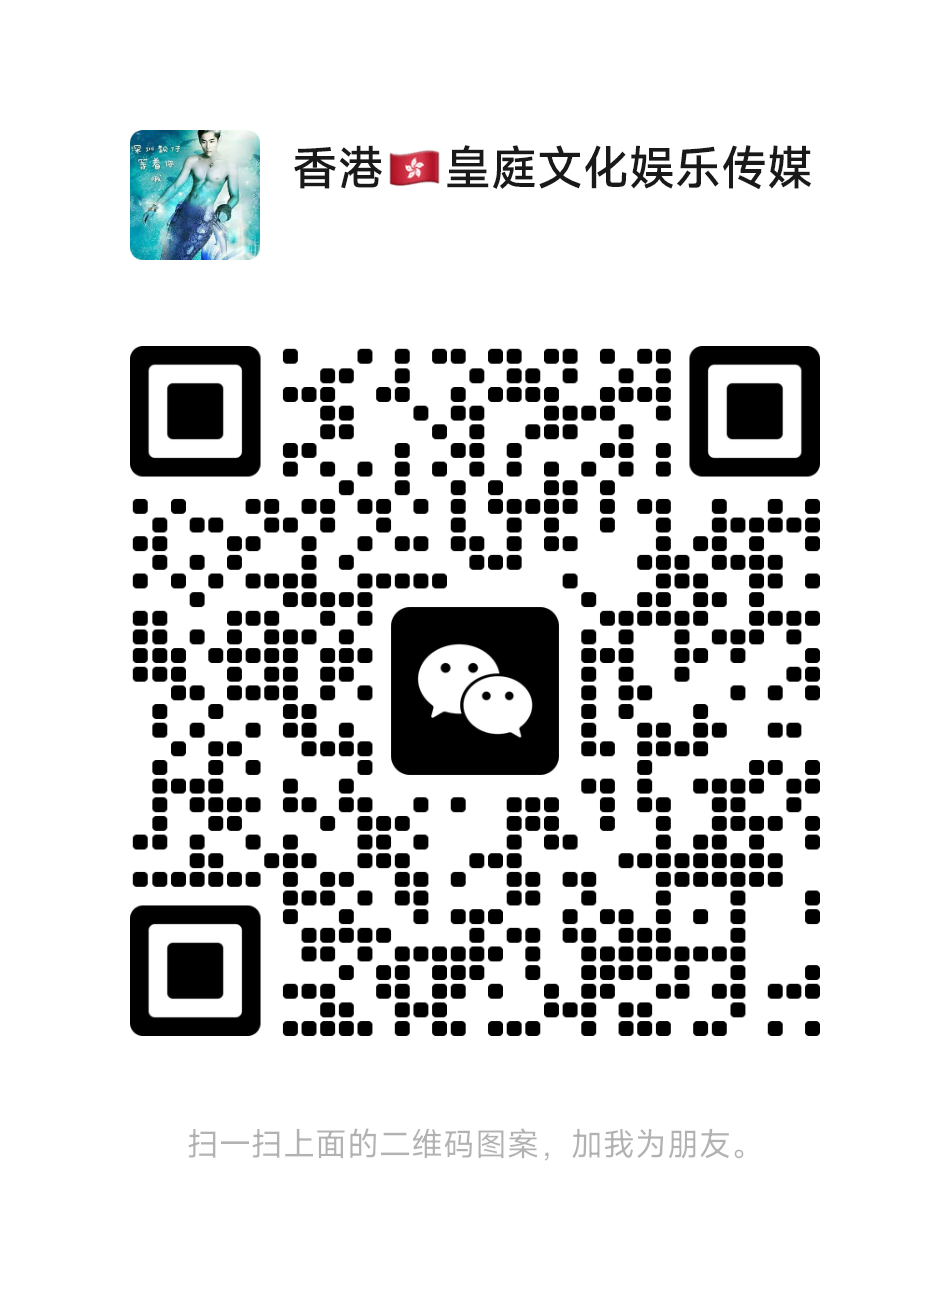 mmqrcode1667165268059.png